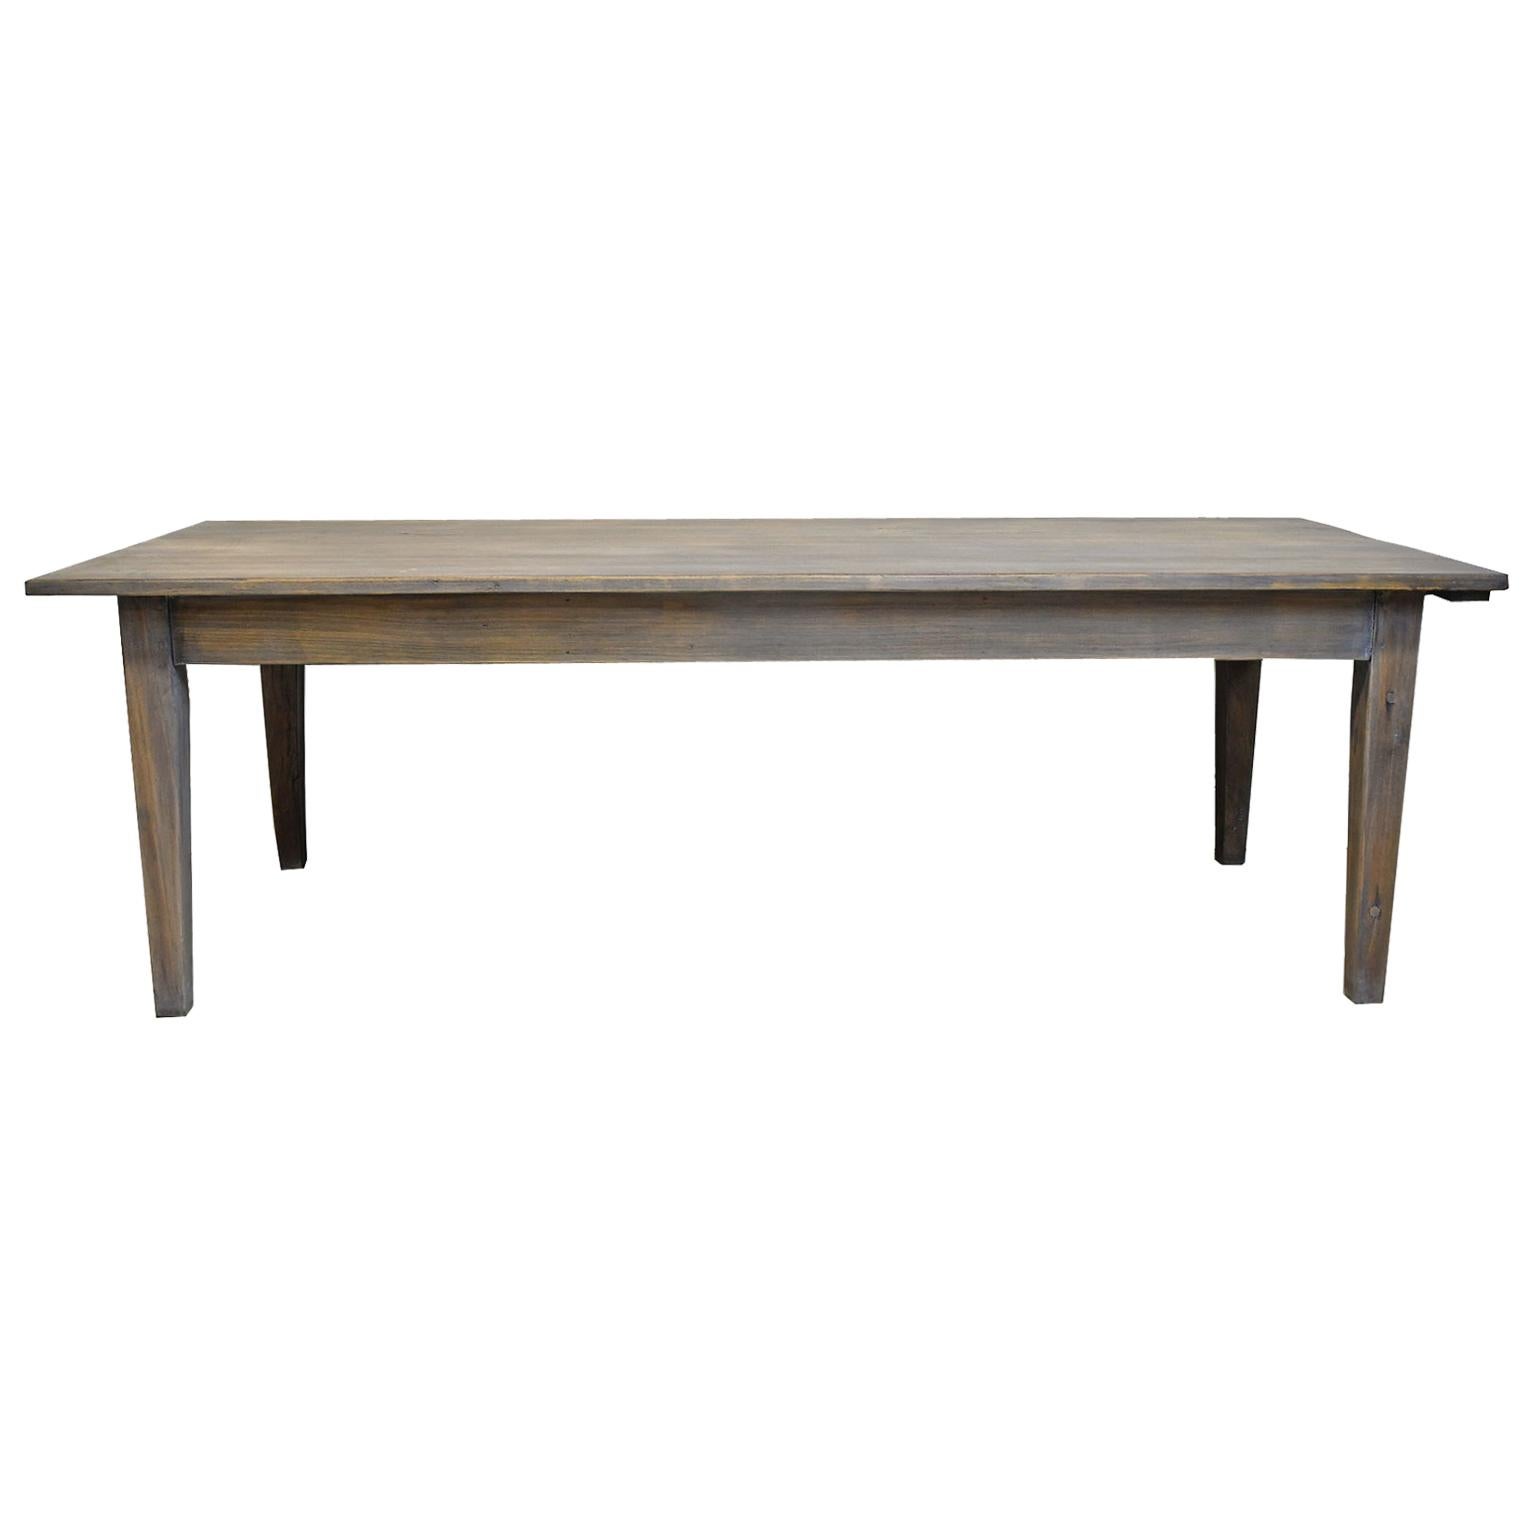 Farmhouse Dining or Kitchen Table in Re-Purposed Oak with Fumed-Taupe Finish